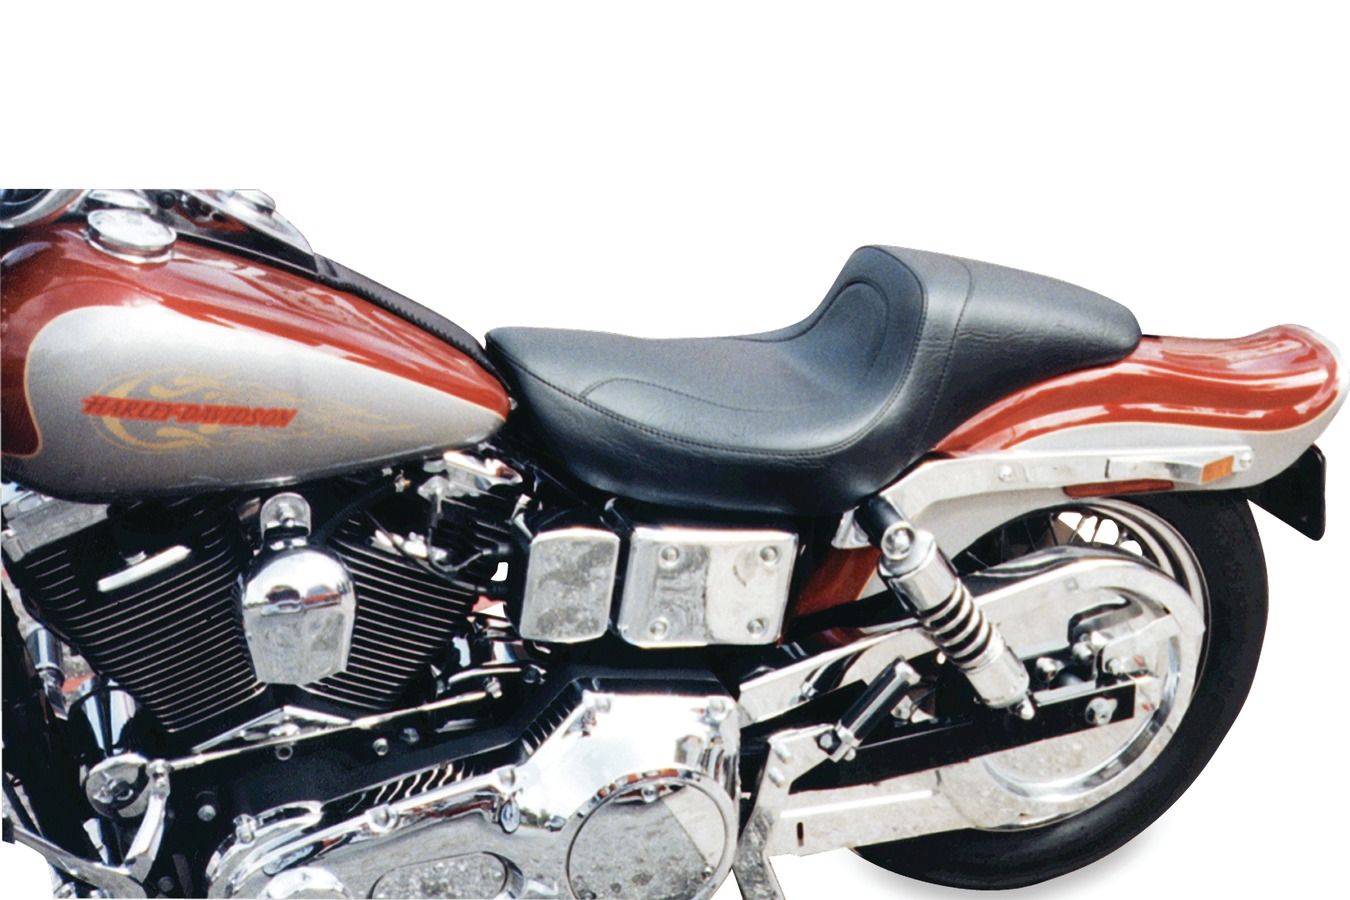 Fastback™ One-Piece Seat for Harley-Davidson Dyna 2006-